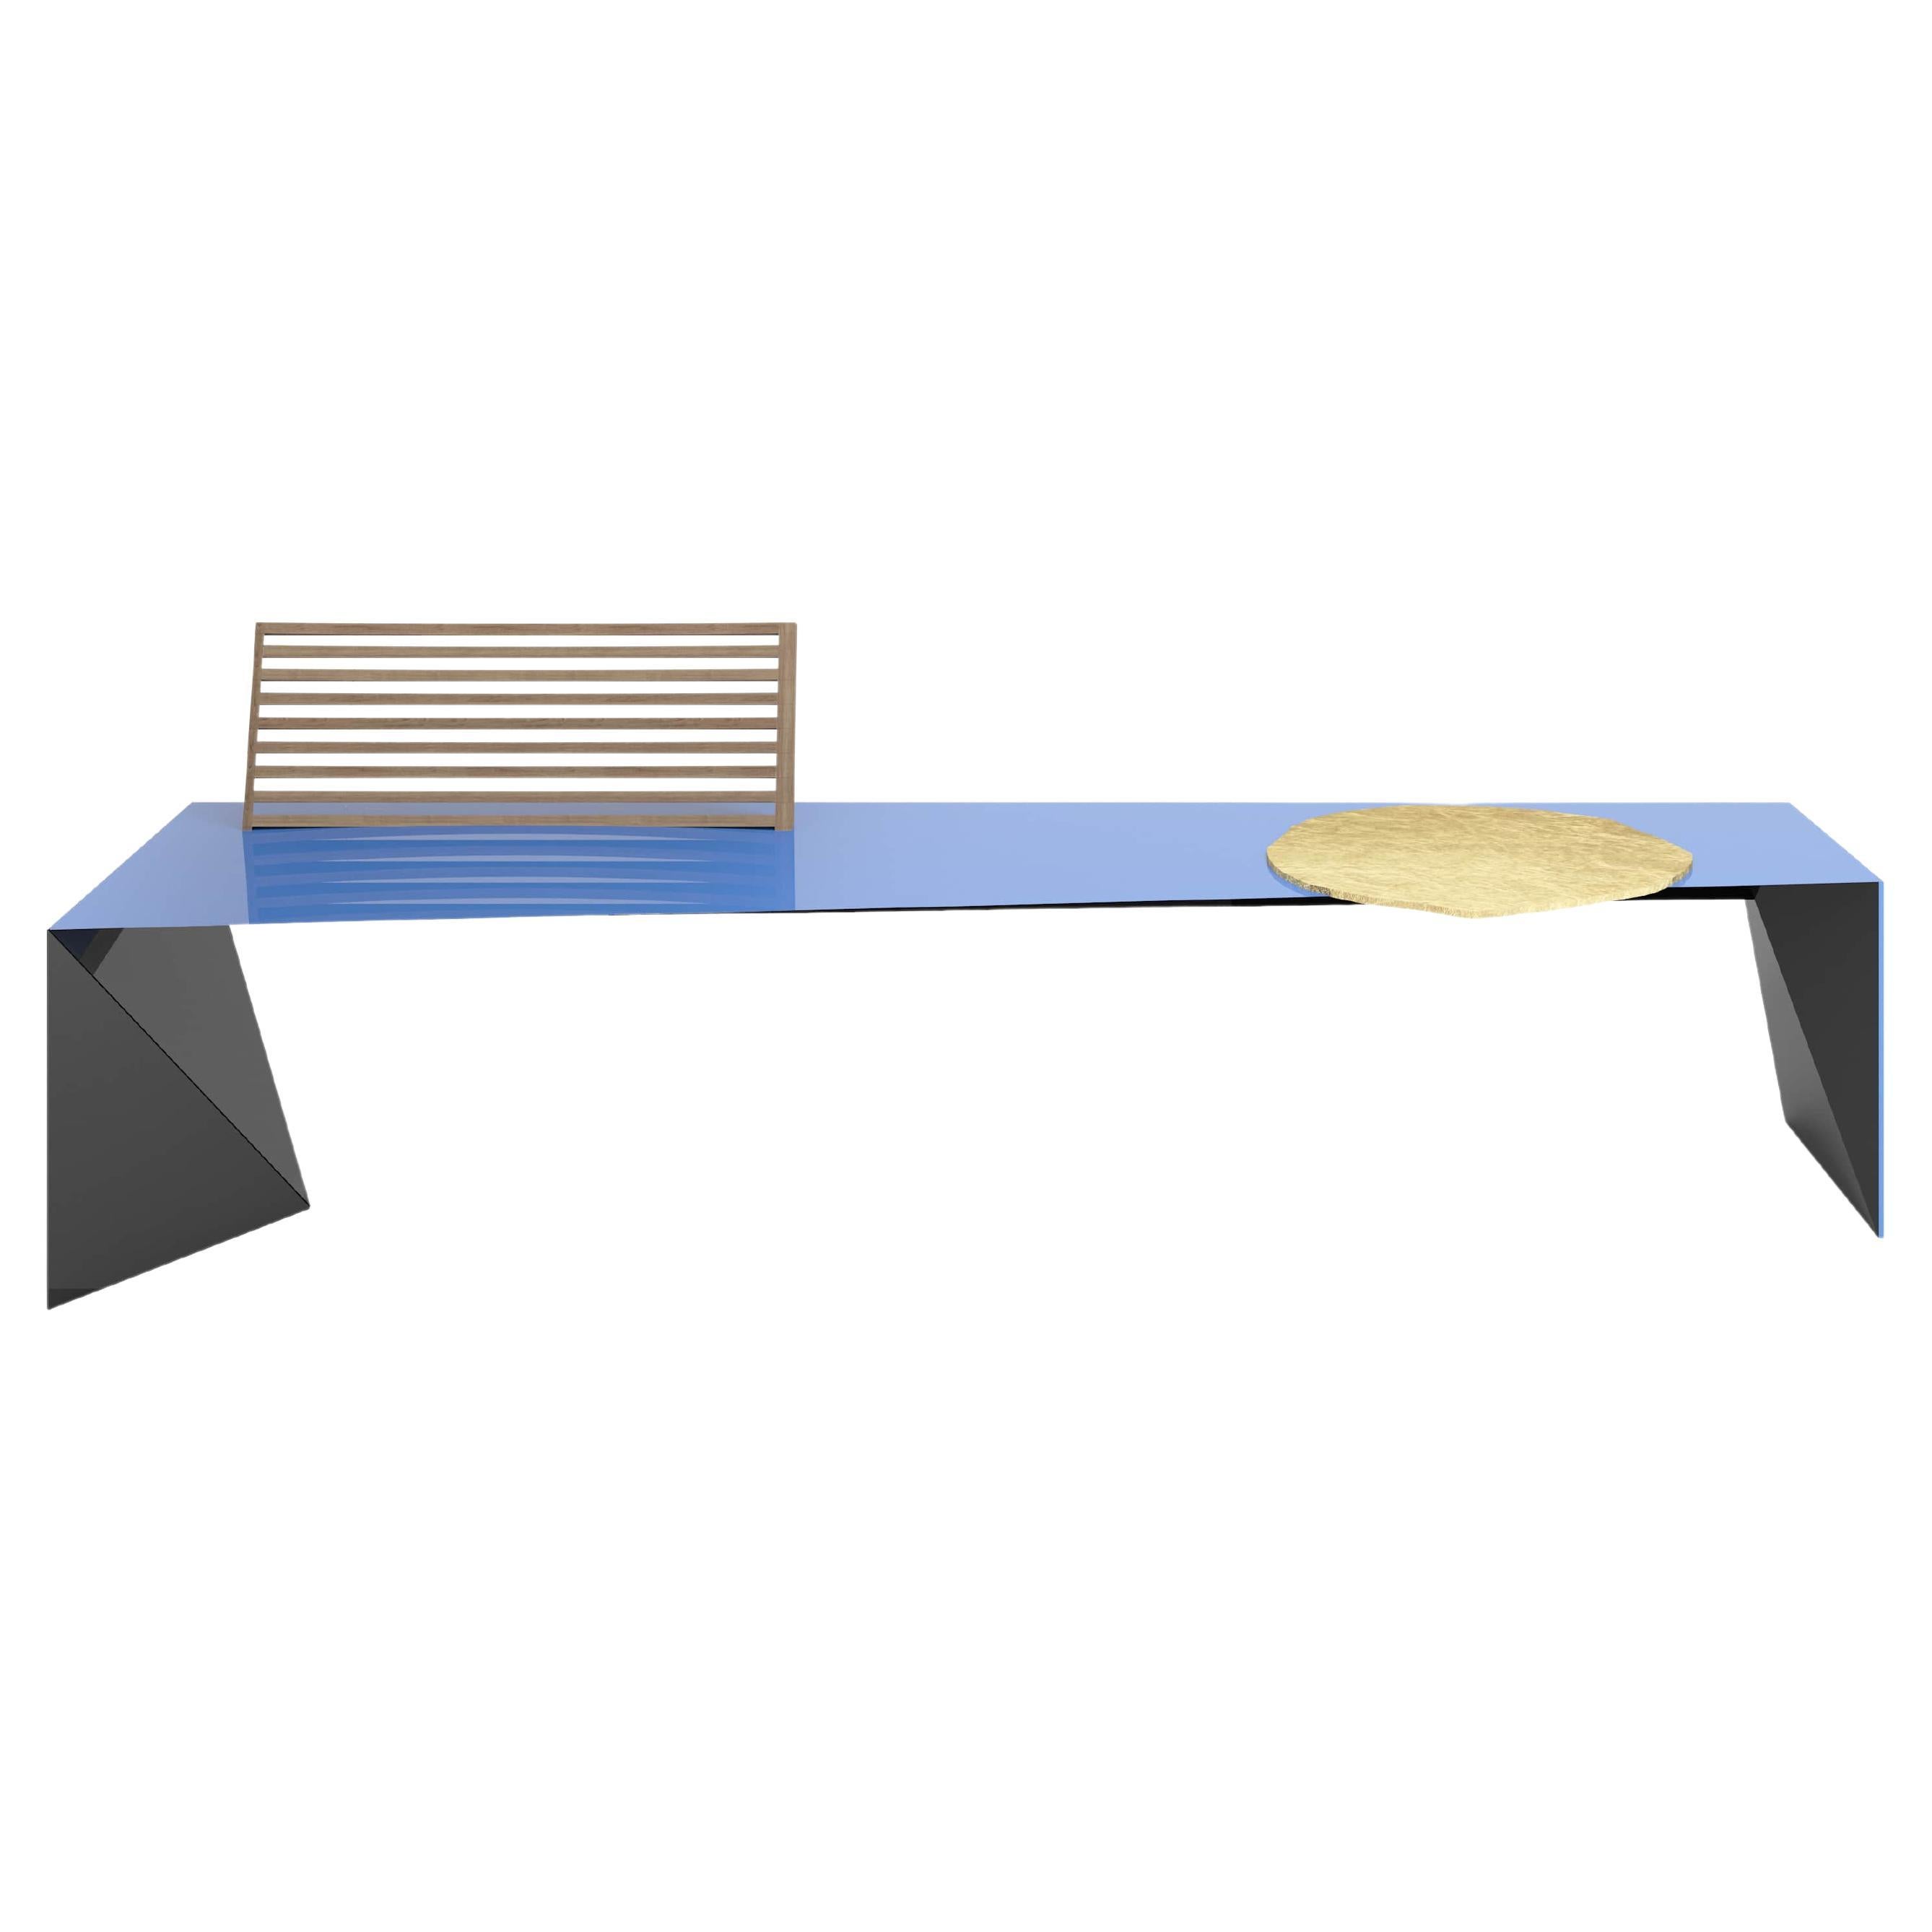 Sunwind Bench by Fabricio Roncca and David Iain Brown For Sale